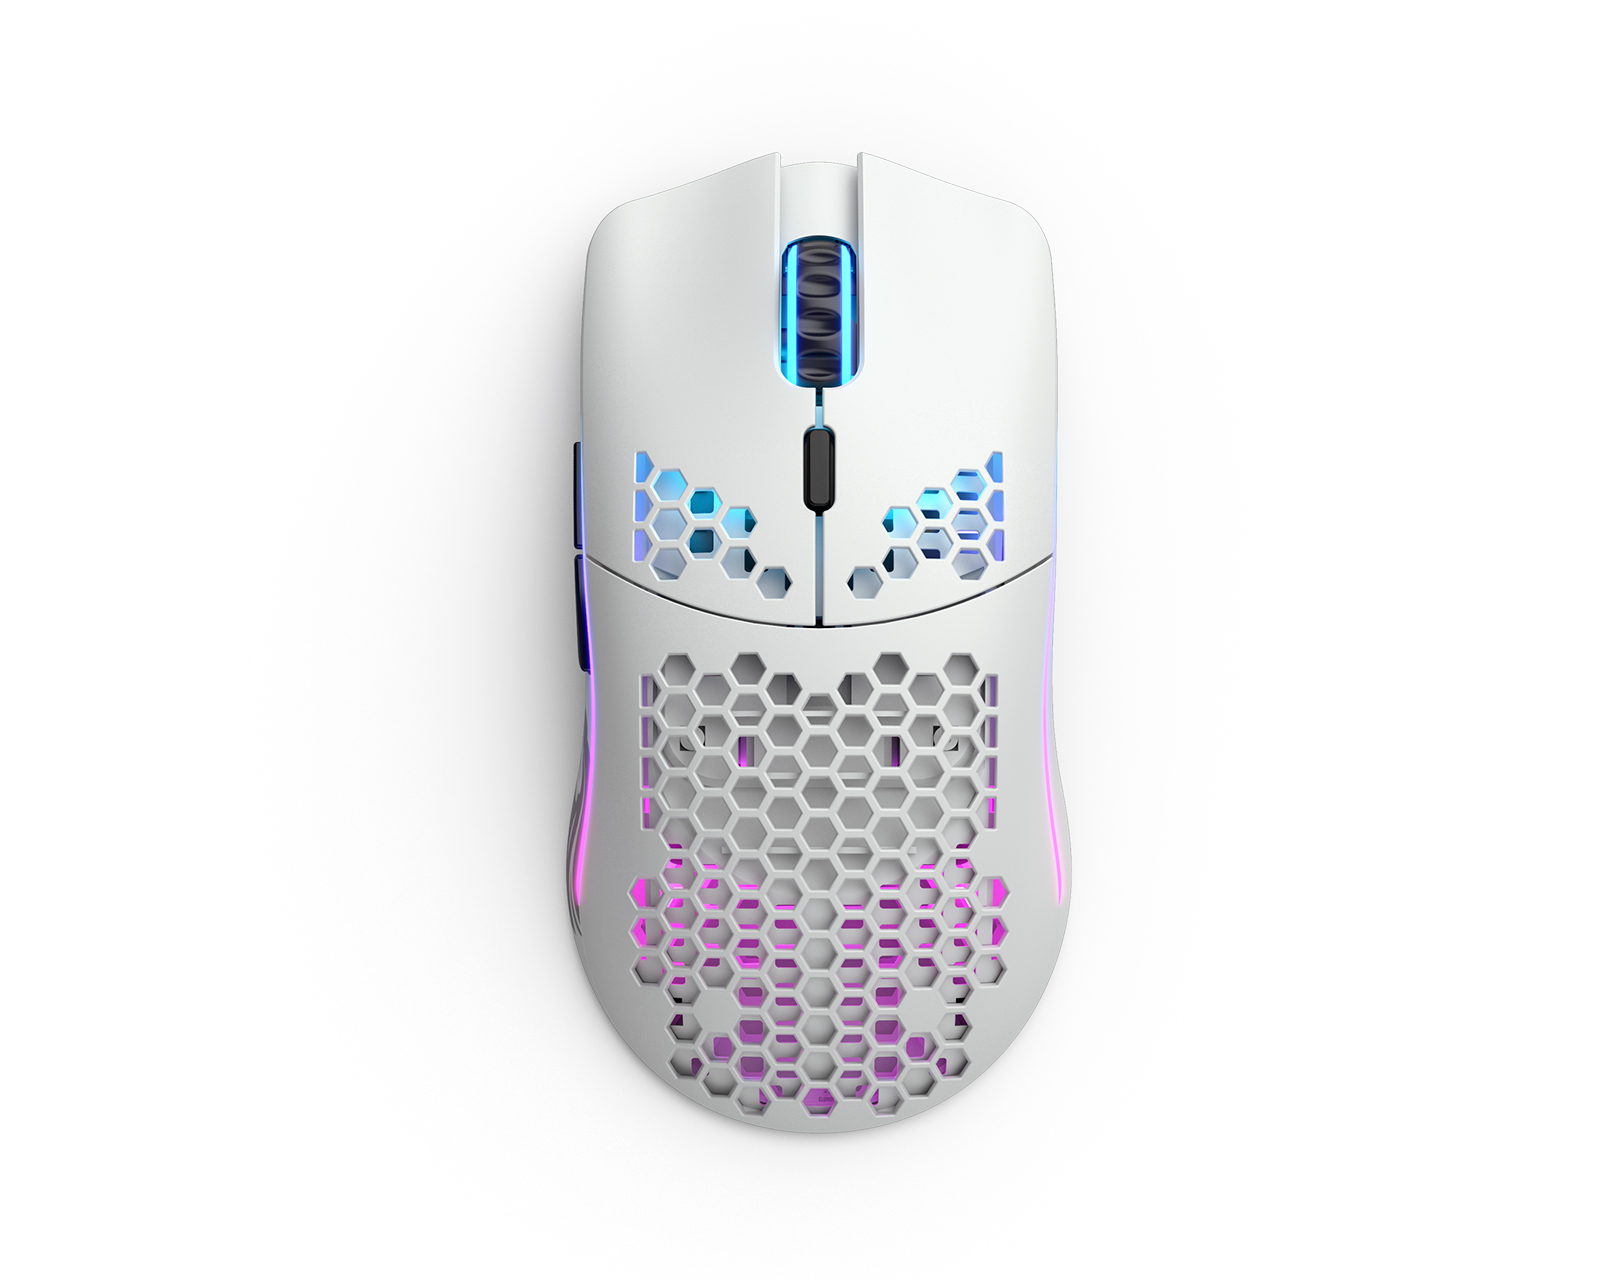 Jumping jack Meesterschap loyaliteit Buy Glorious Model O Wireless Gaming Mouse White at MaxGaming.com